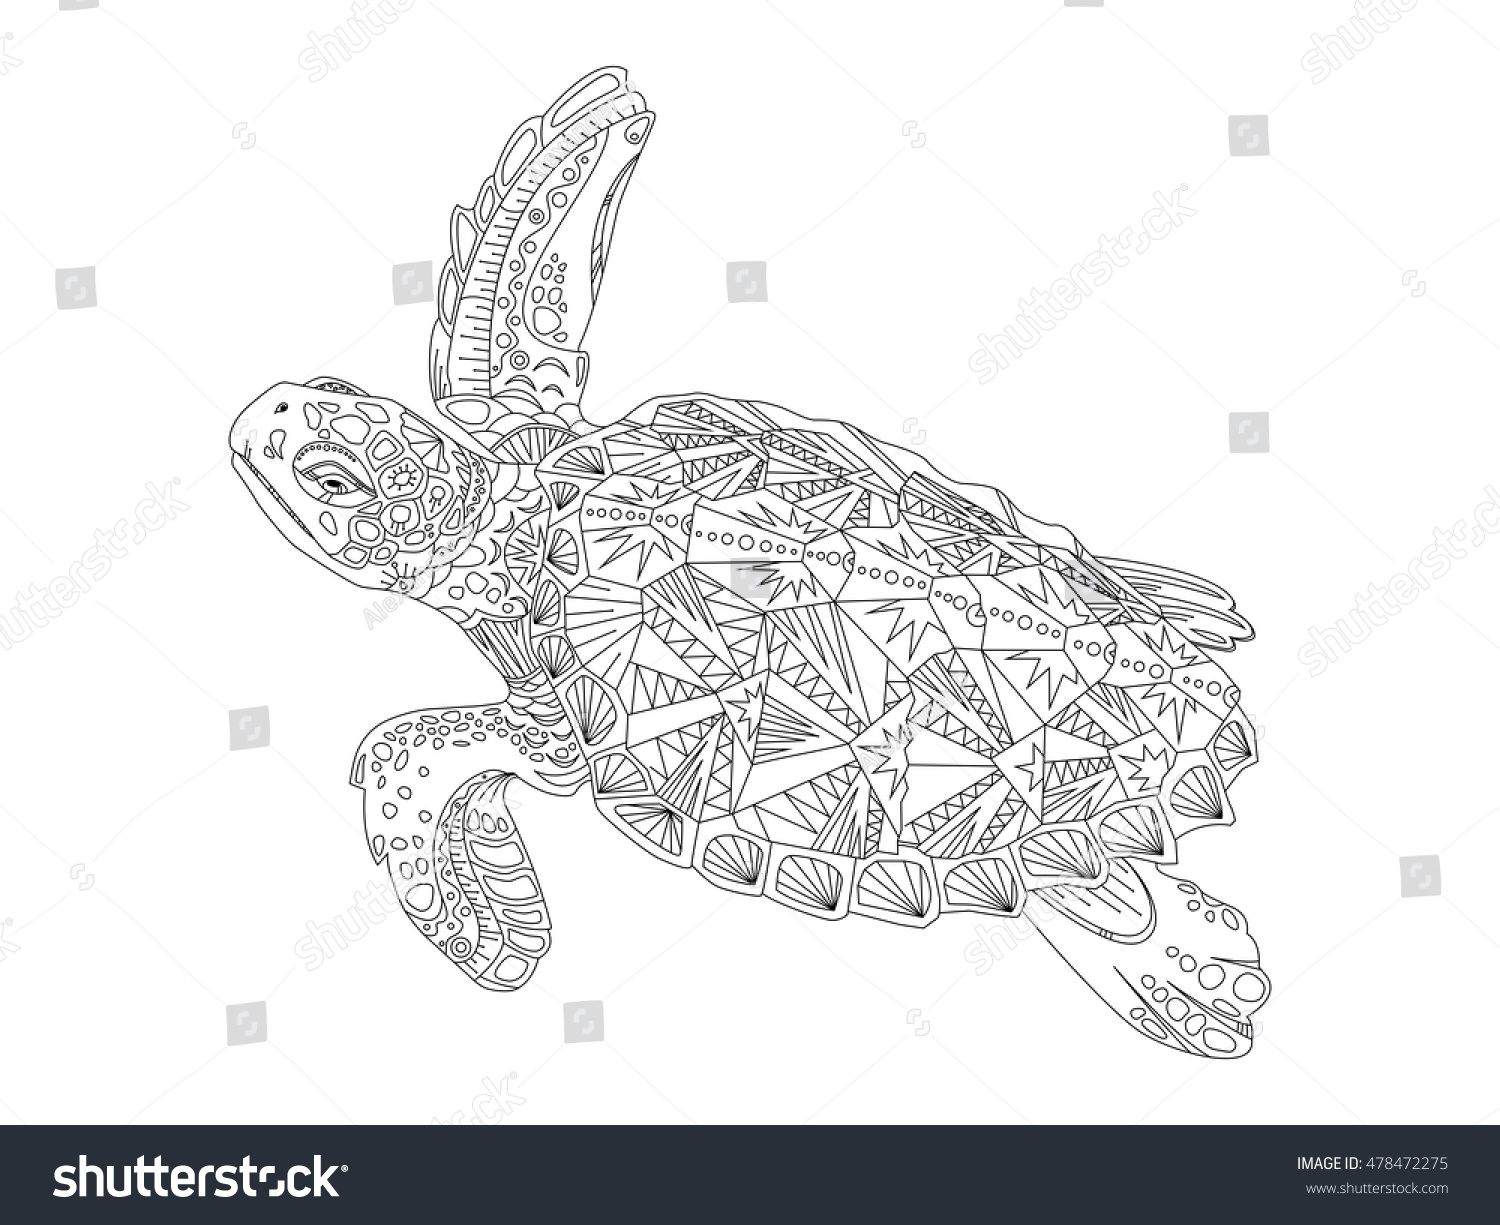 SVG of Turtle coloring book vector illustration. Anti-stress coloring for adult. Zentangle style. Black and white lines. Lace pattern svg